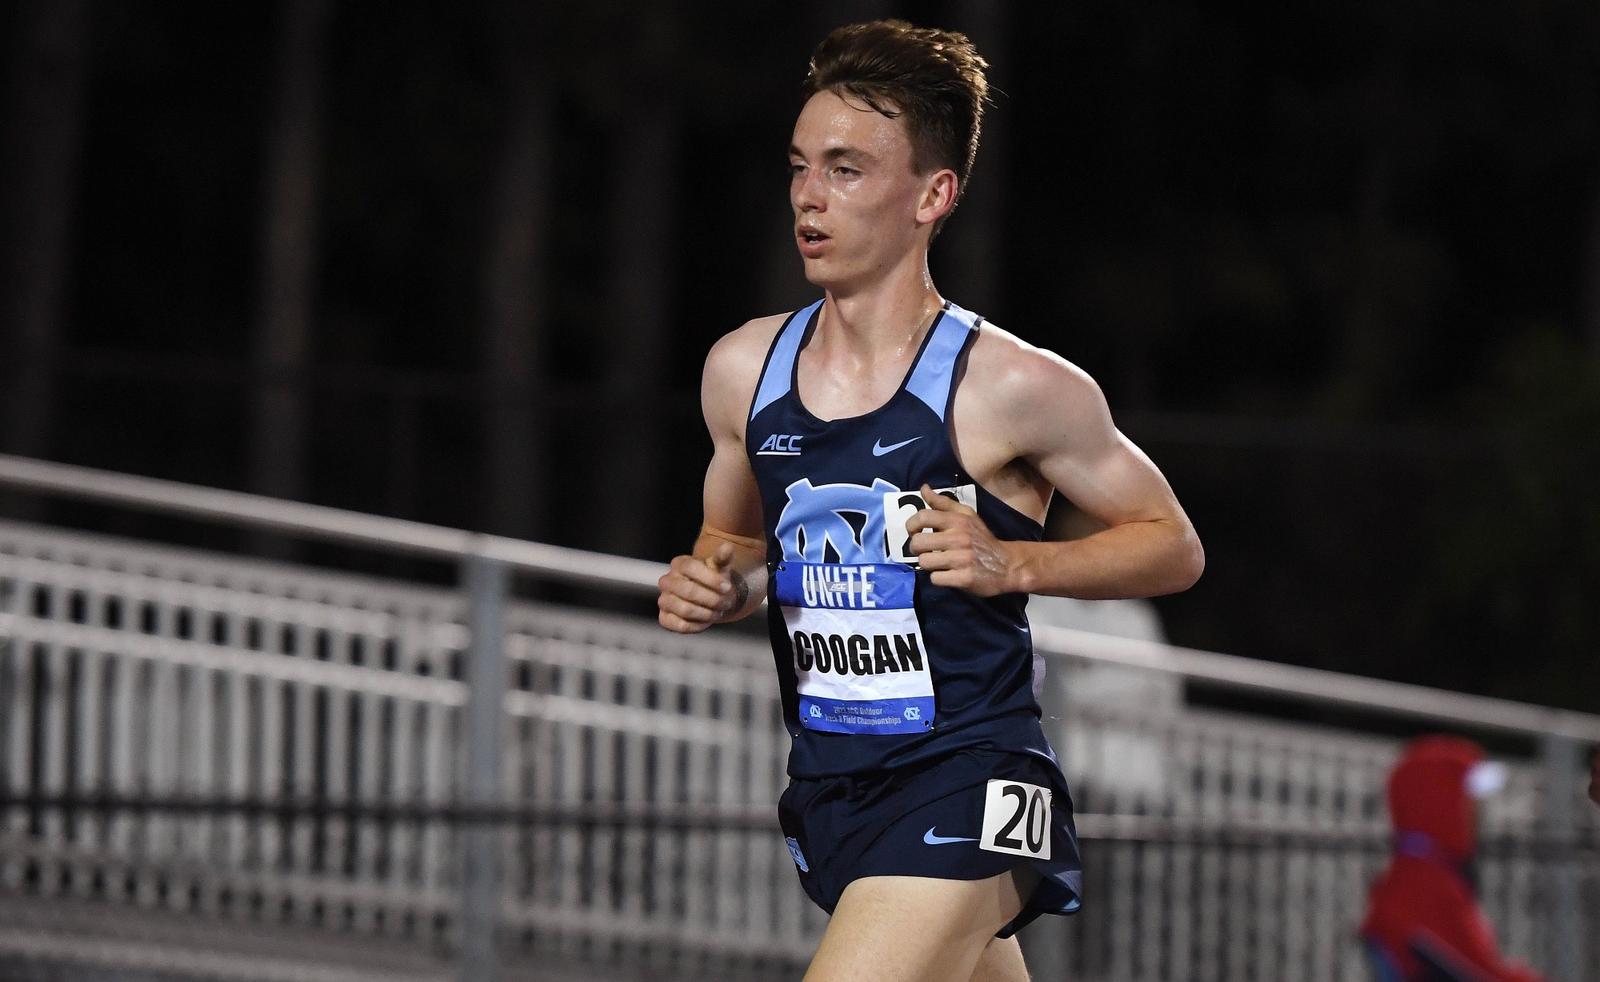 Will Coogan Wins Penn Relays 5k, Track and Field Heading To Charlotte This Weekend